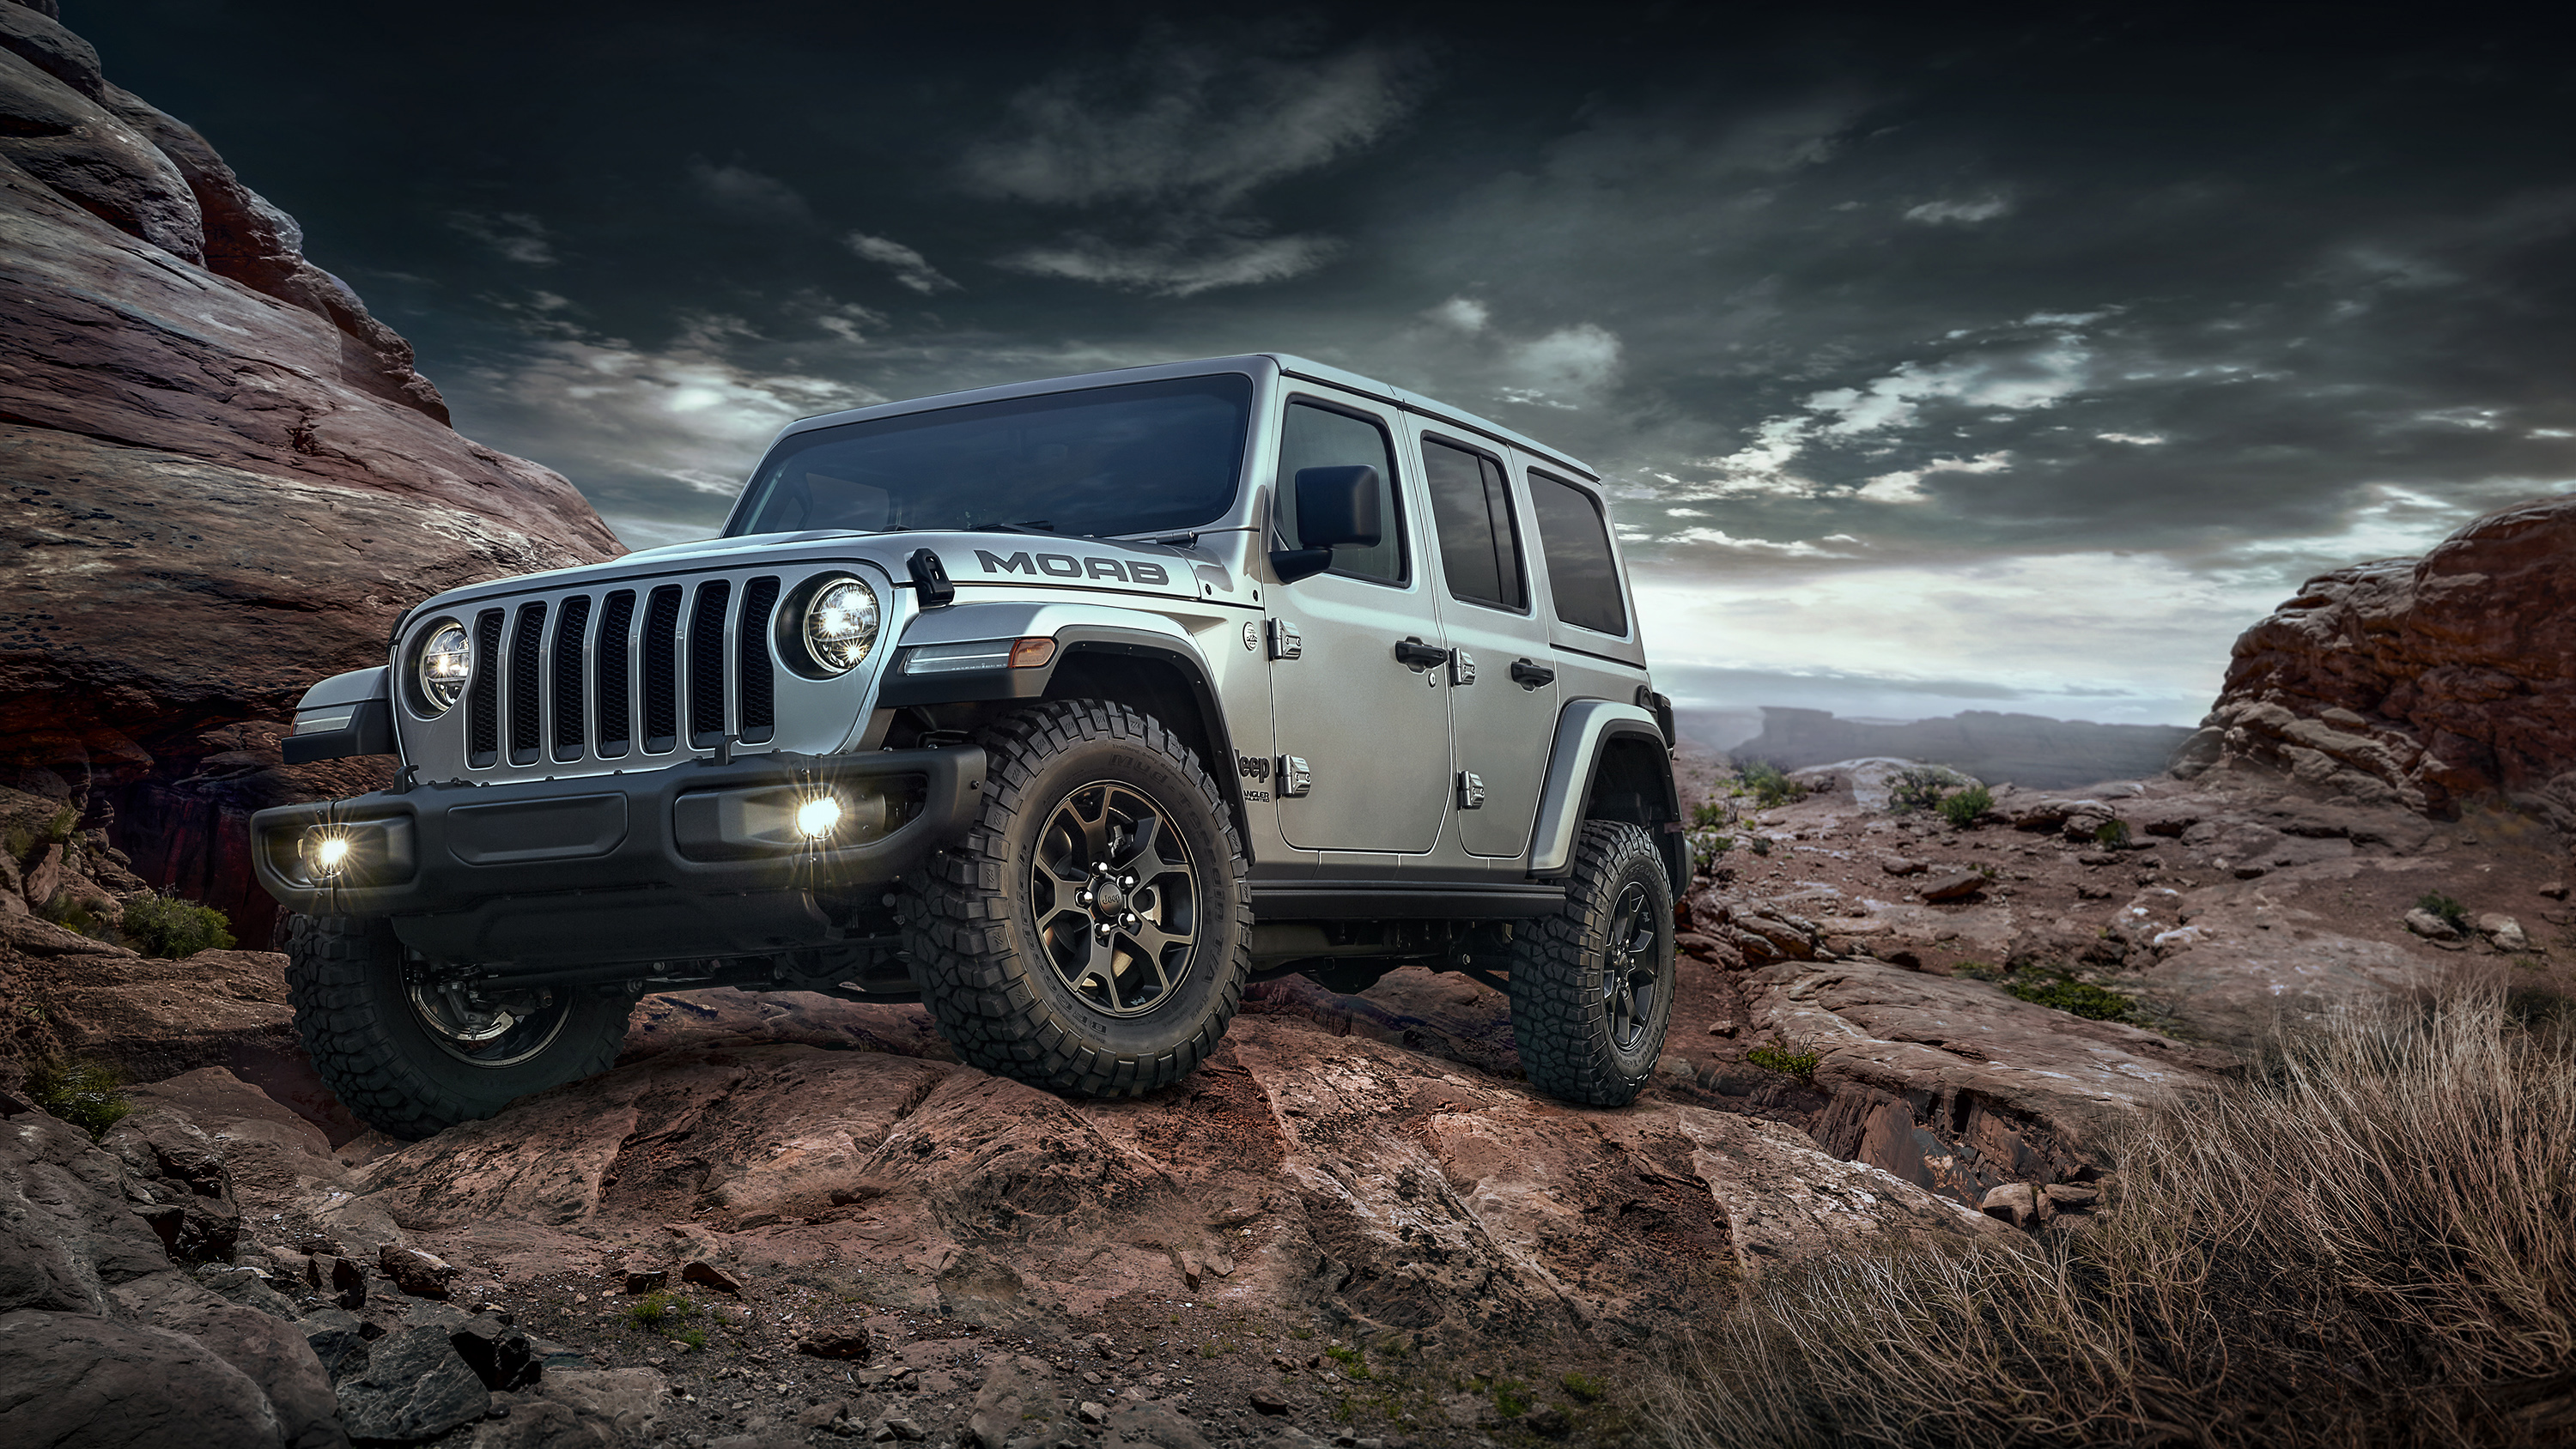 2018 Jeep Wrangler Unlimited Moab Edition Wallpaper Hd Car